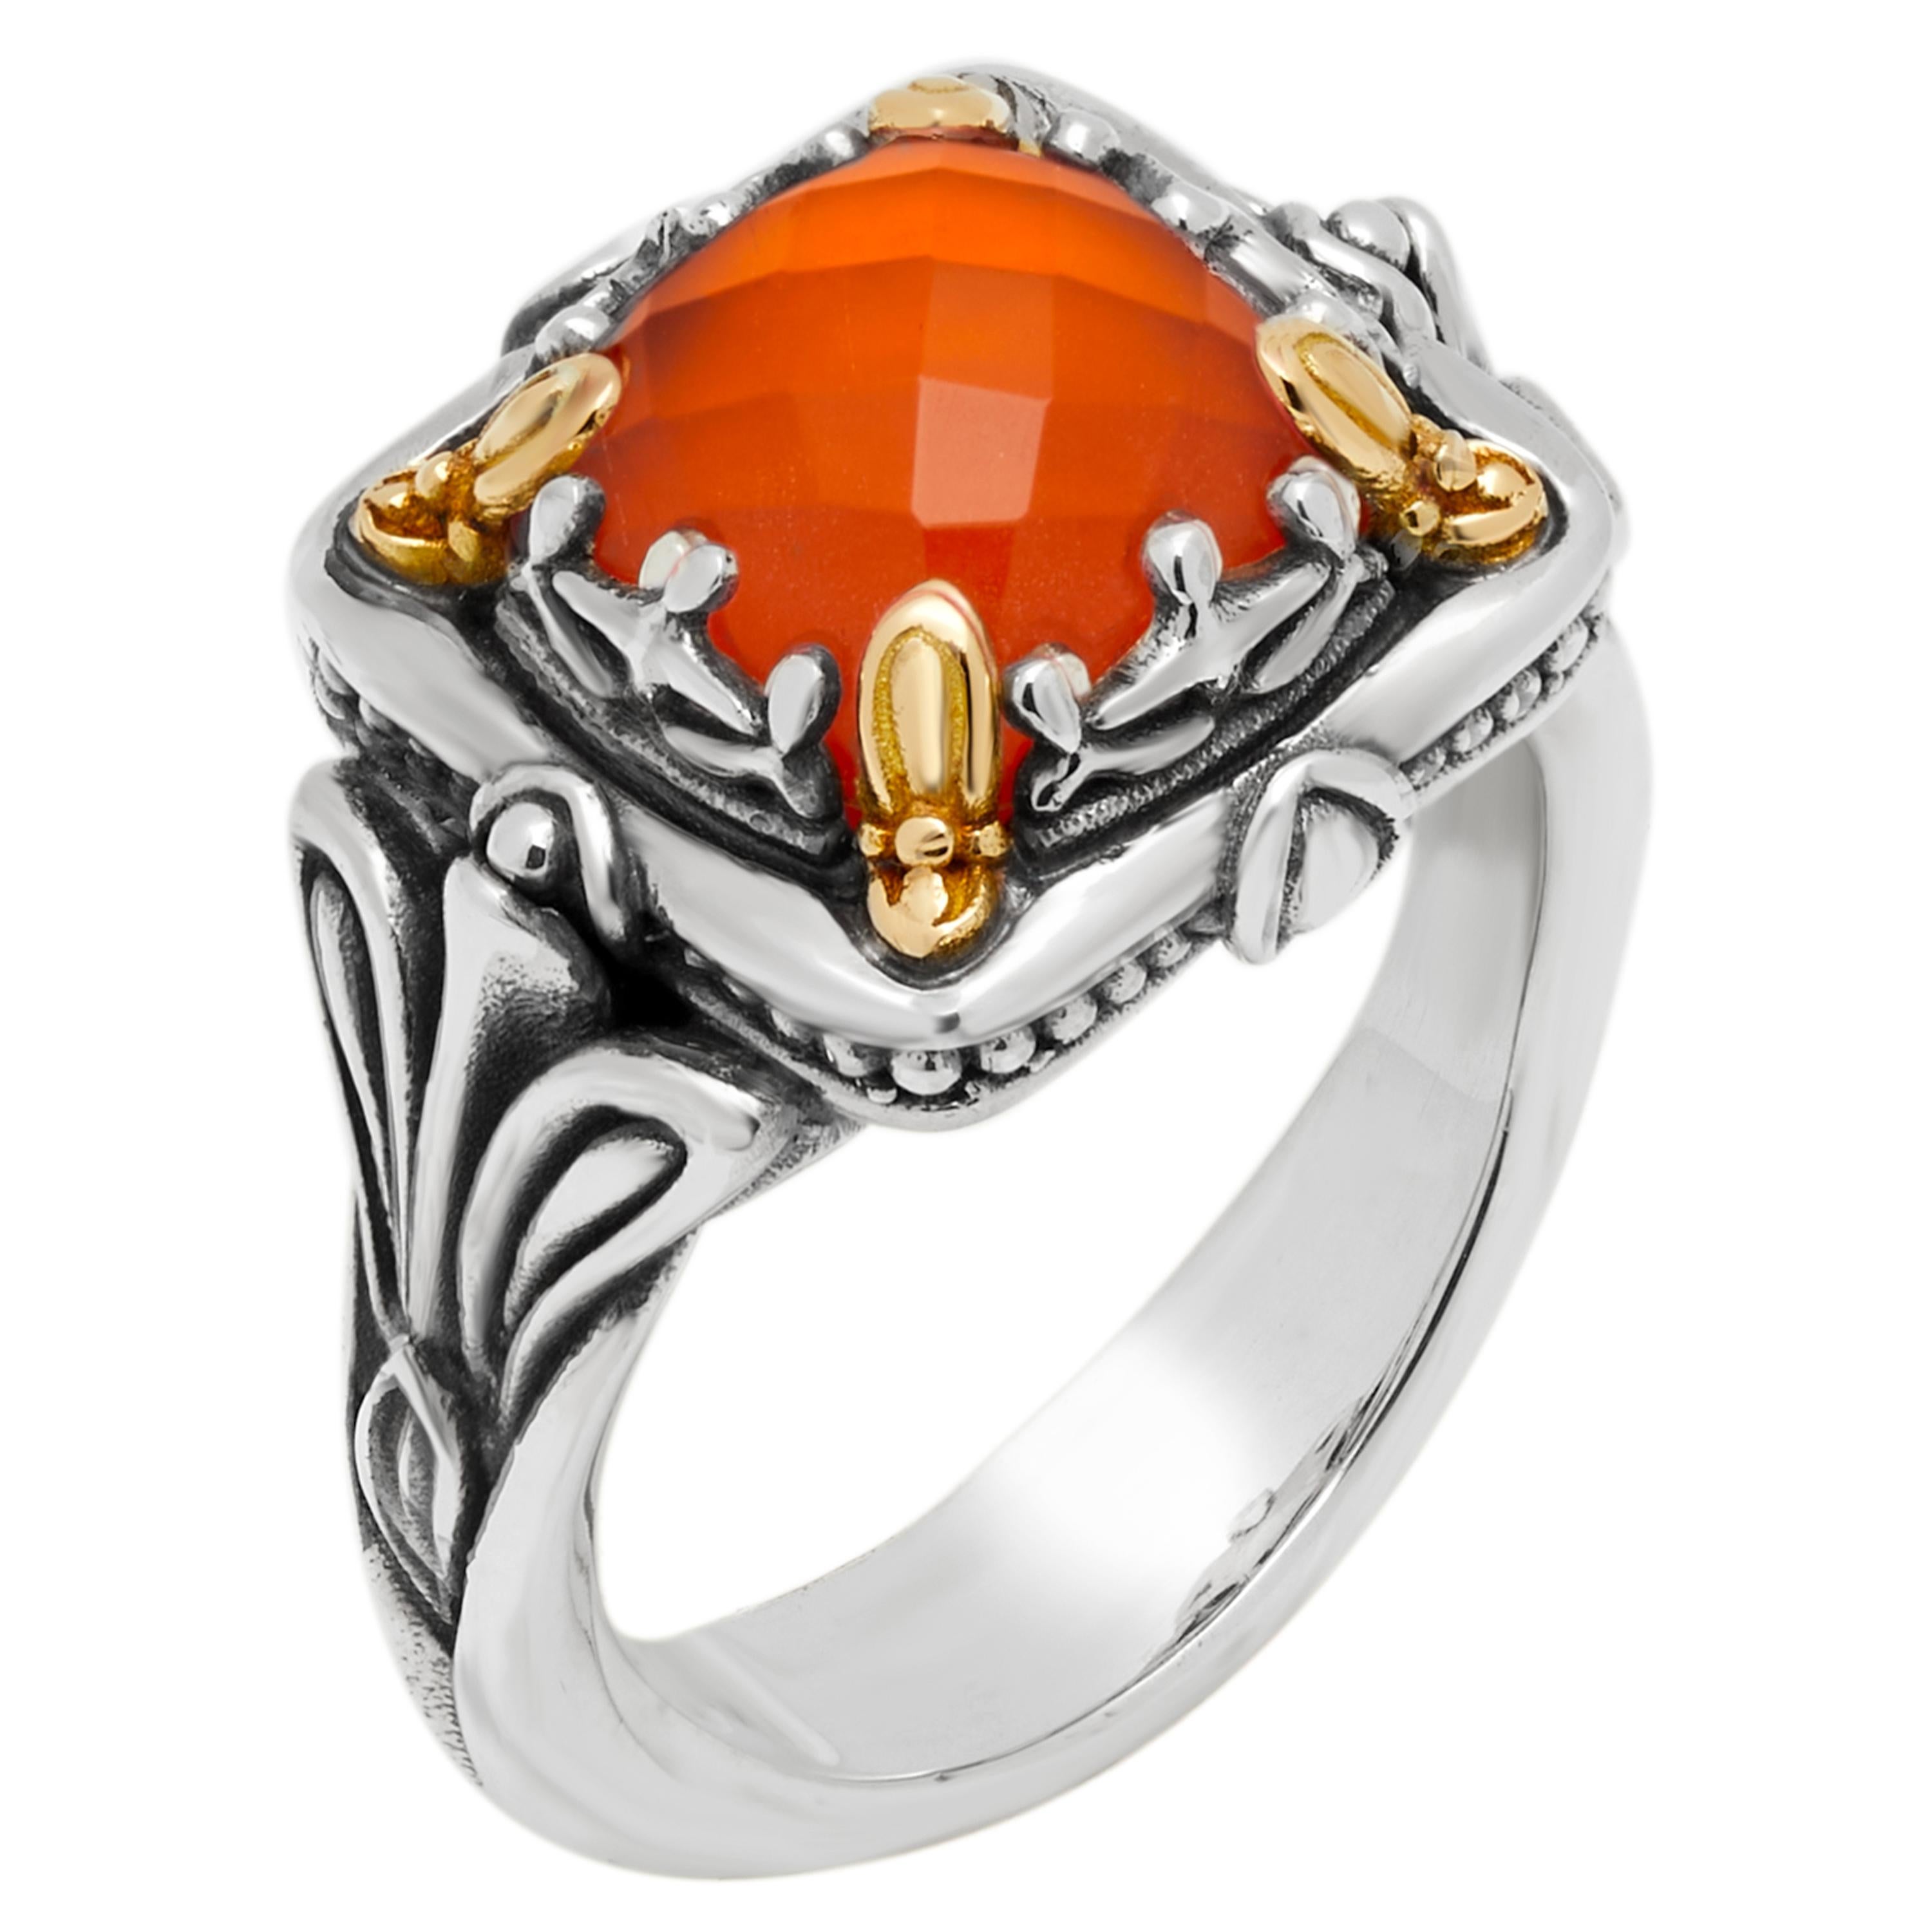 This captivating Konstantino Sterling Silver and 18K Yellow Gold Statement Ring features a faceted Carnelian Doublet held by 18K Yellow Gold prongs . The ring size is 7 (54.4). The Band Width is 4.85mm.
